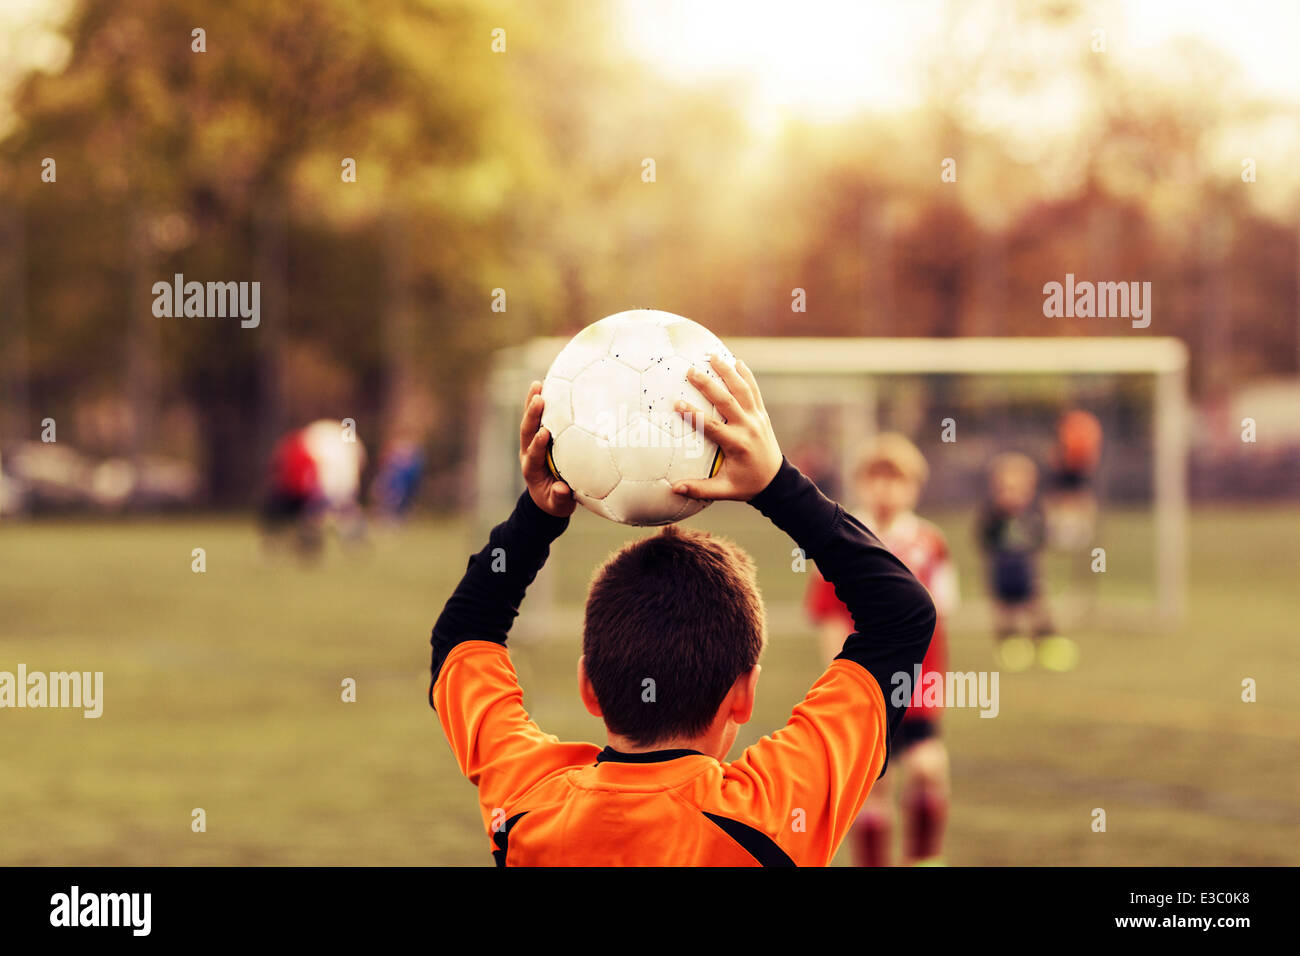 young football player making throw-in with ball in evening sunshine Stock Photo